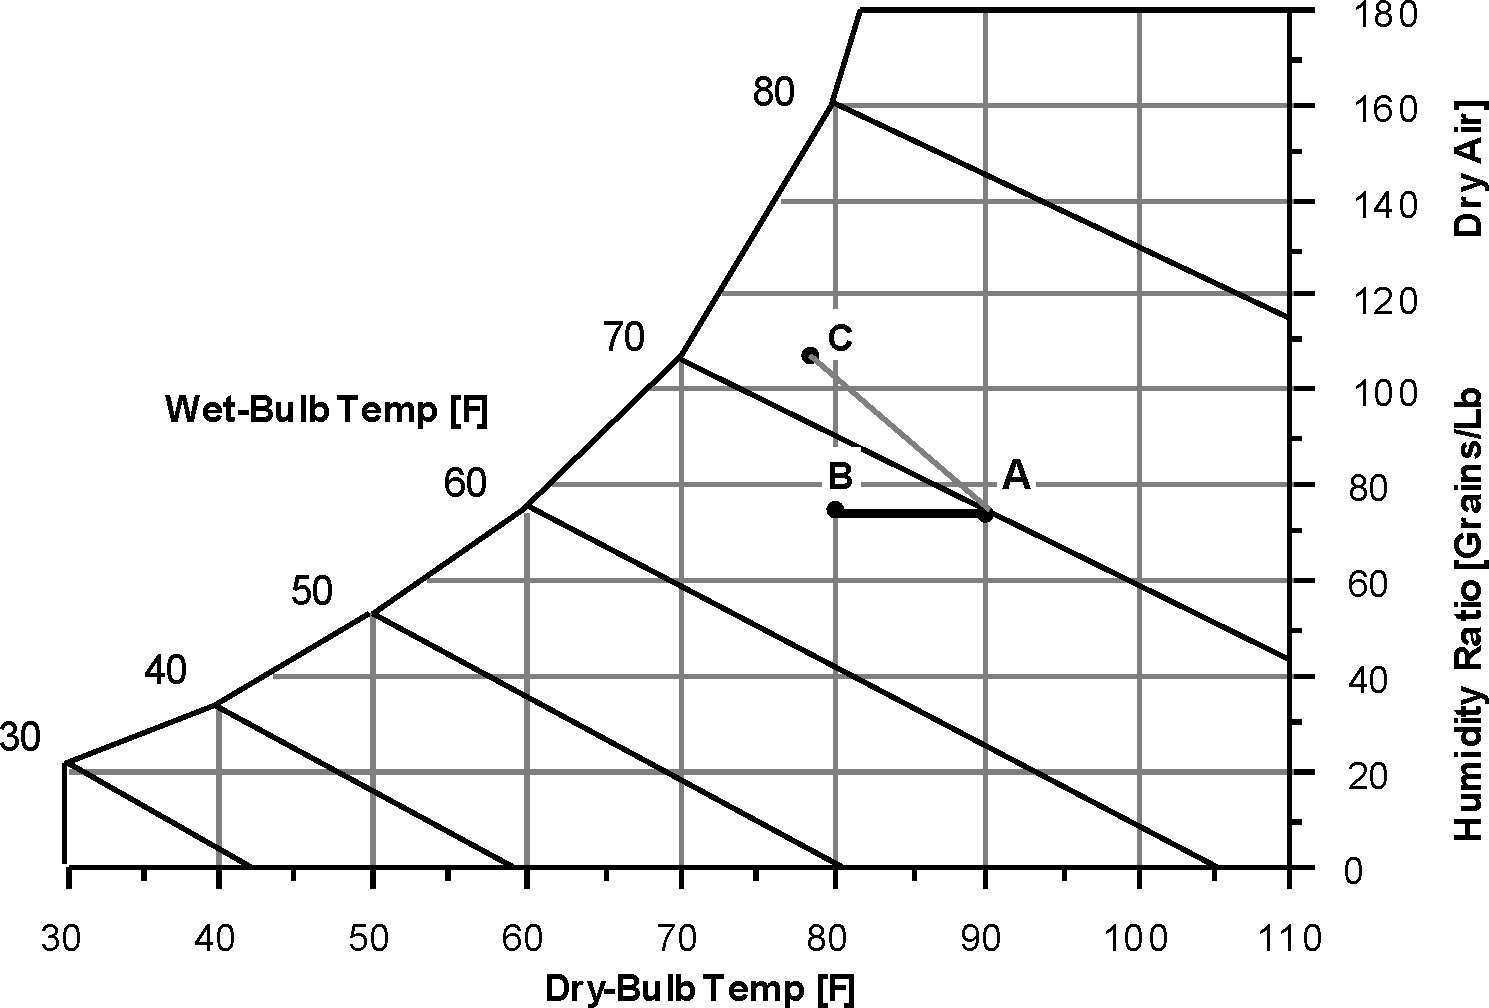 Secondary Air Process – Indirect Wet Coil Evaporative Cooler [fig:secondary-air-process-indirect-wet-coil]